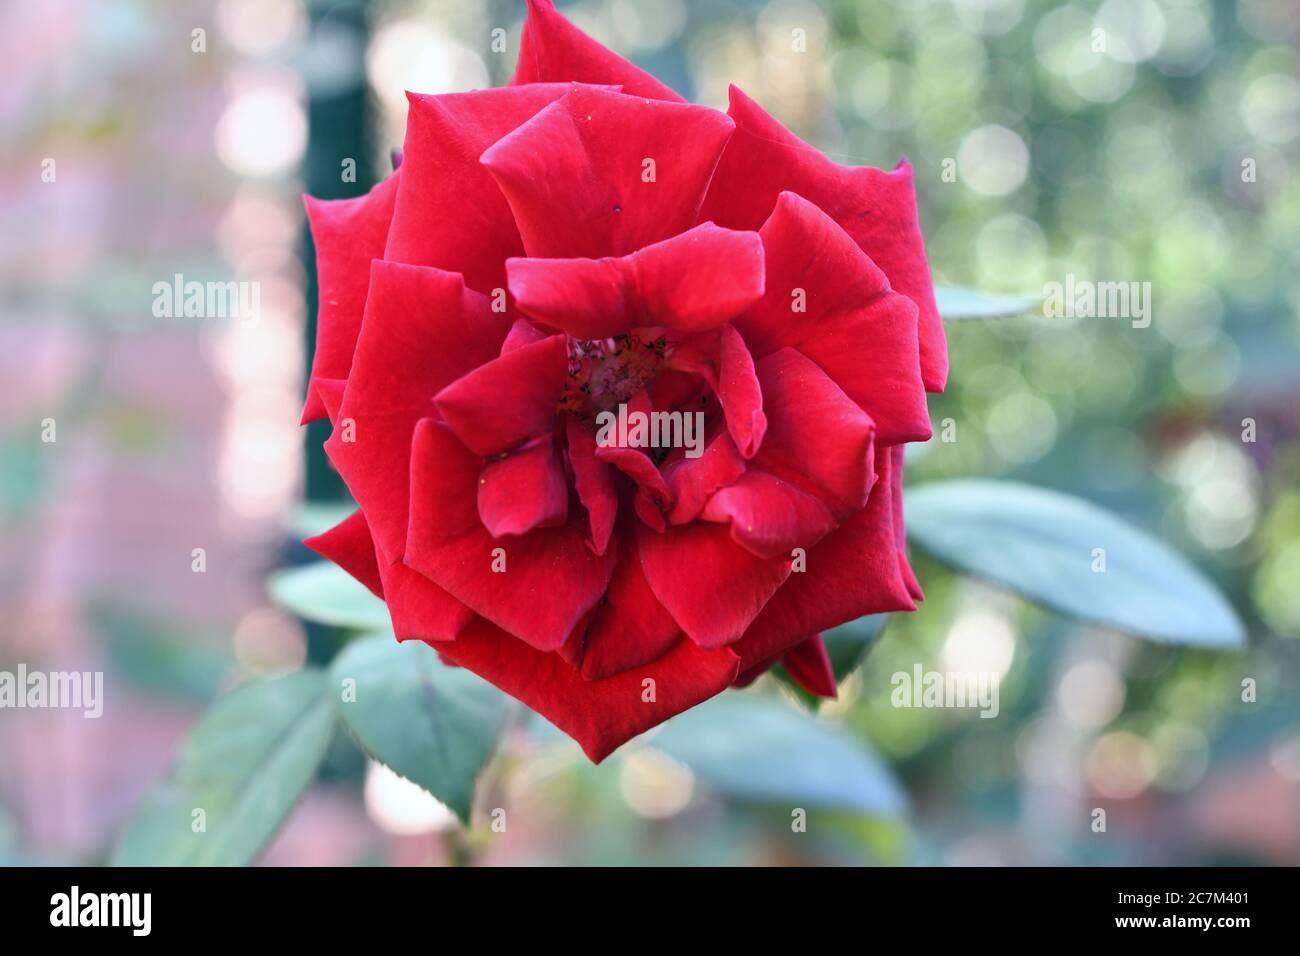 Big red rose widely open in a garden Stock Photo